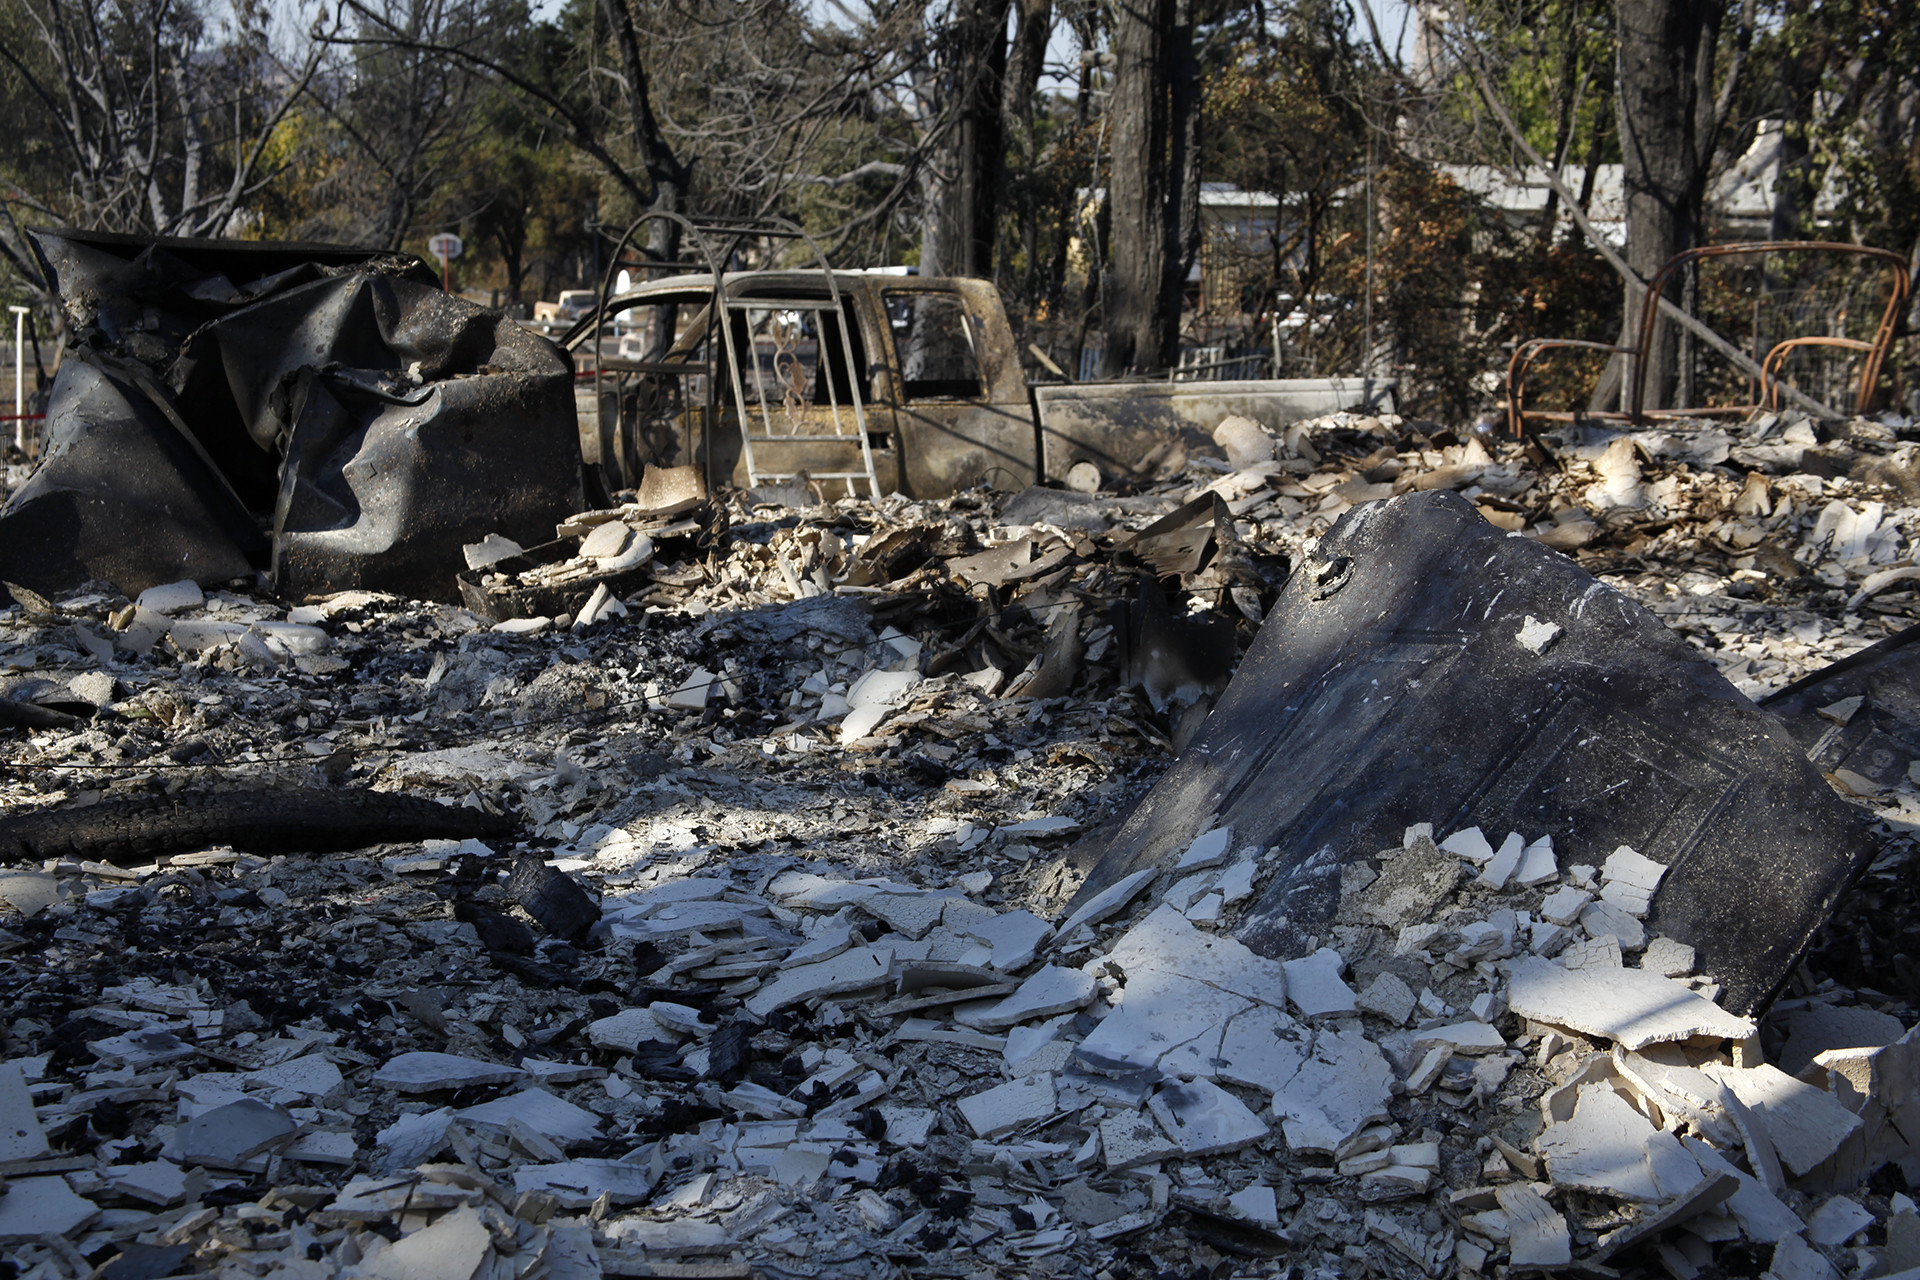 All that remained of the Skidmores' home and eight rental cabins after the Clayton Fire in mid-August.